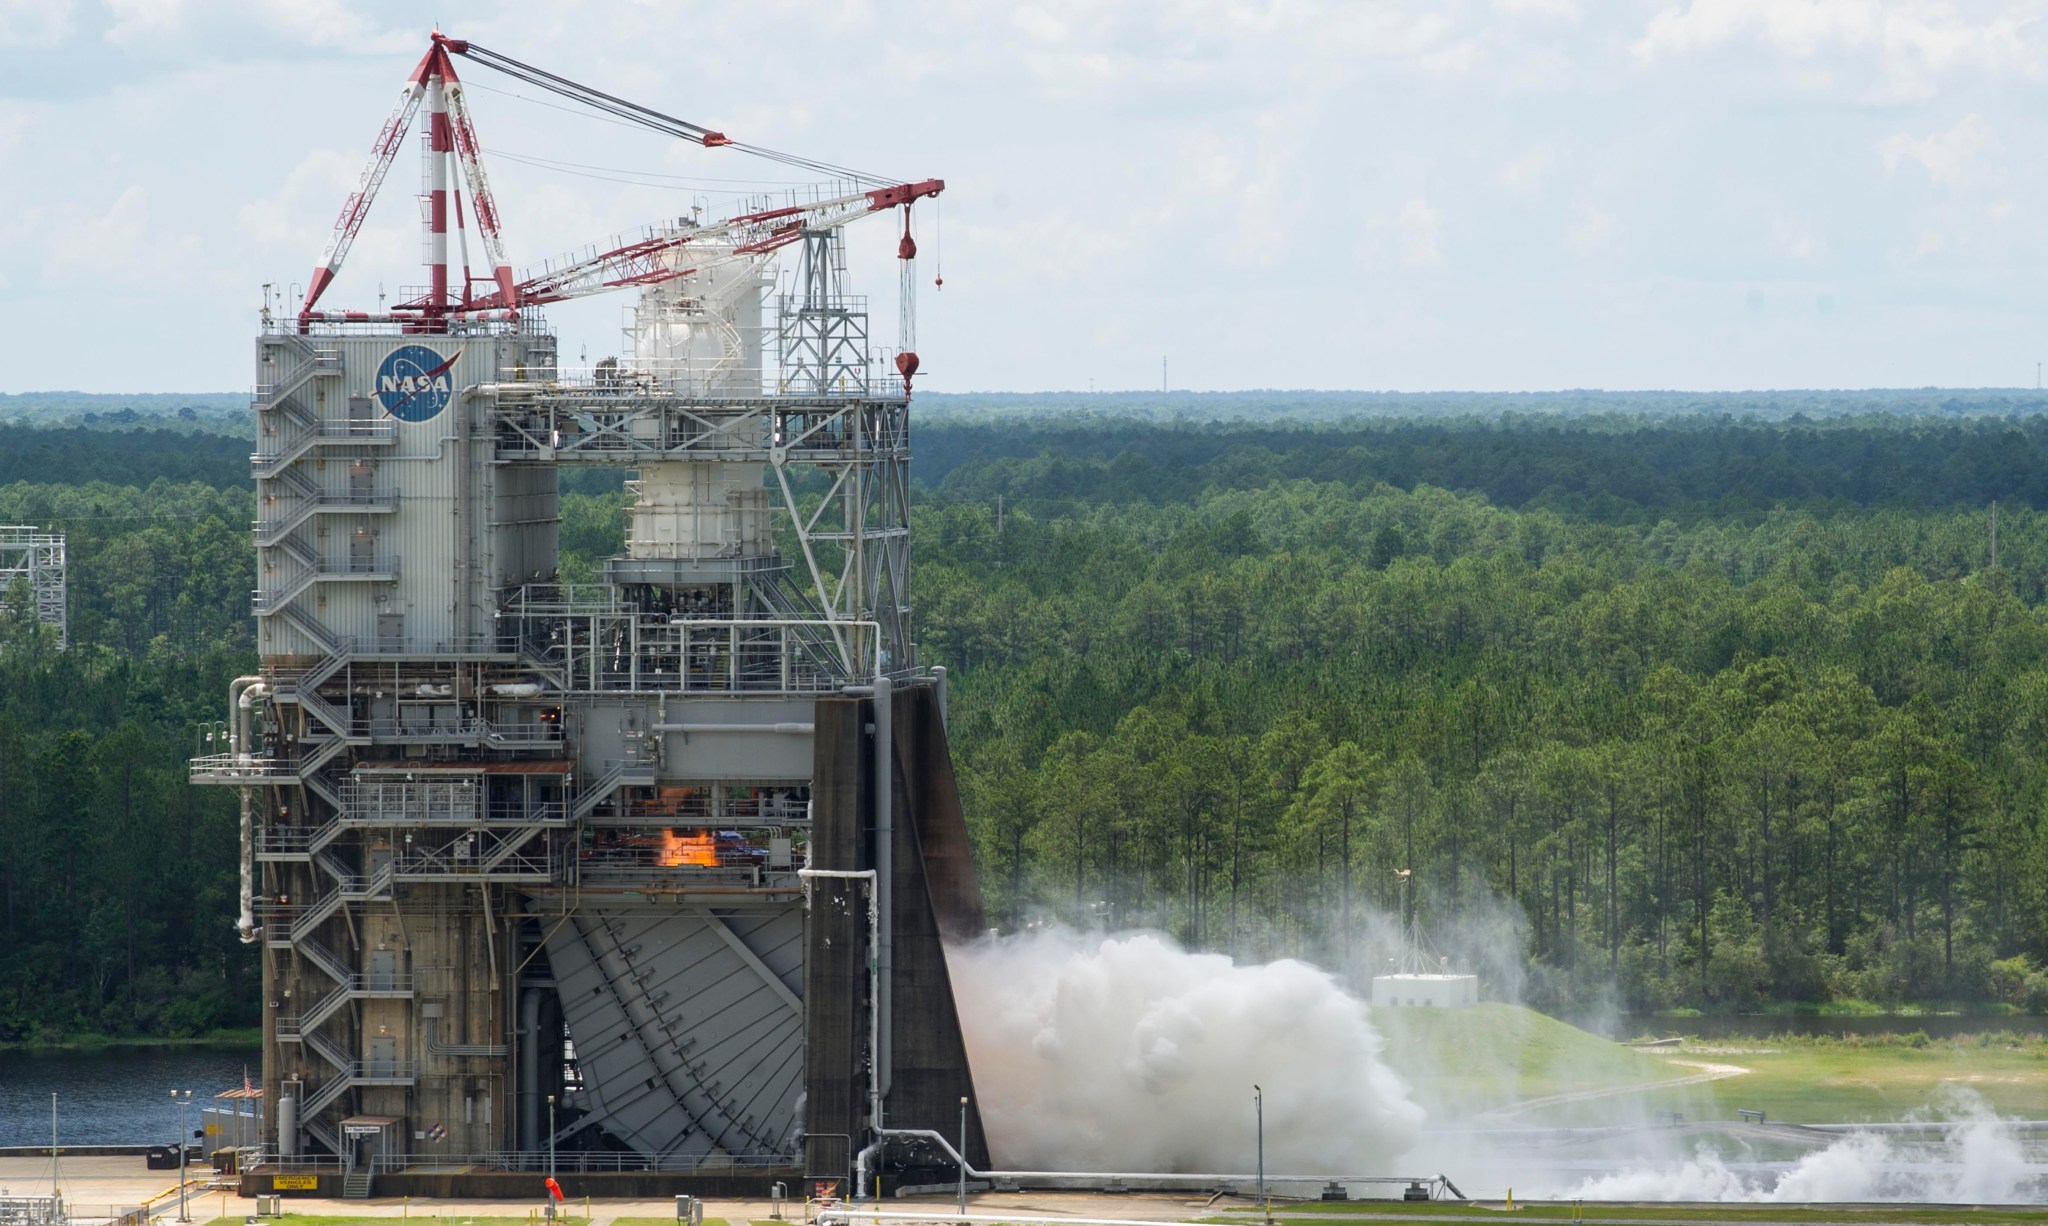 The RS-25 engine fires up at the beginning of a 500-second test June 11 at NASA's Stennis Space Center near Bay St. Louis, Miss.